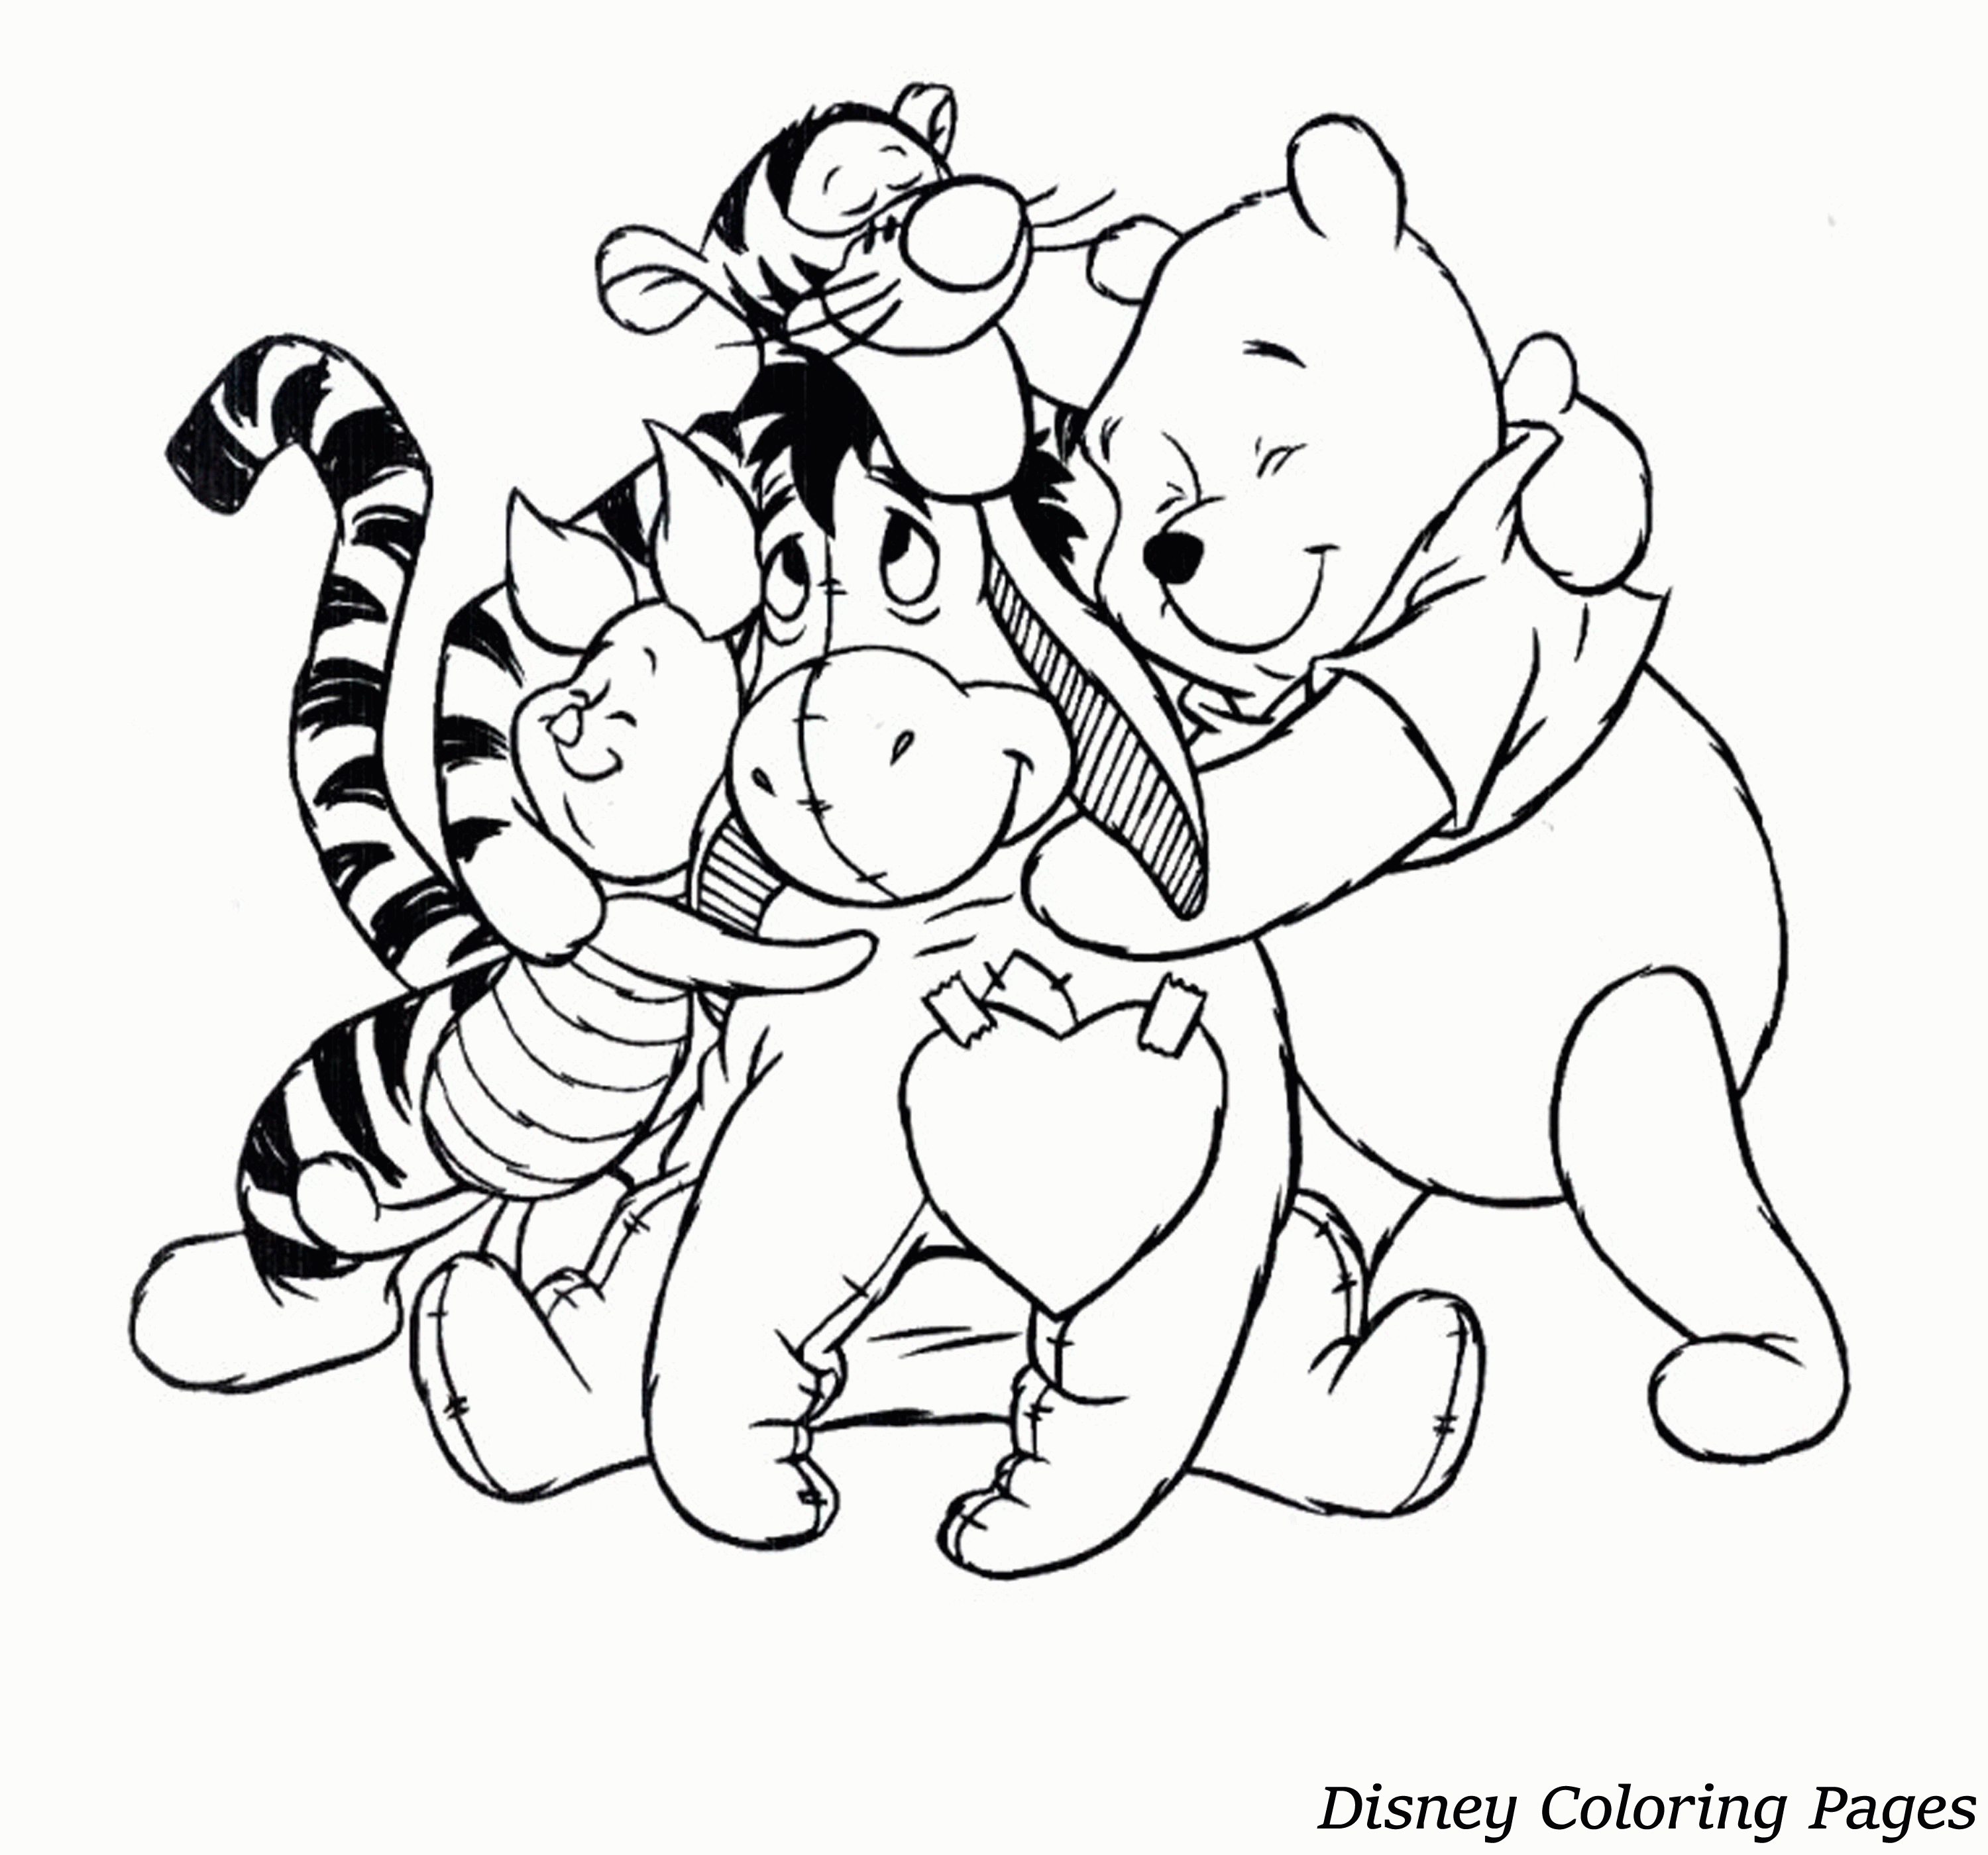 Disney Coloring Pages For Toddlers - Coloring Home